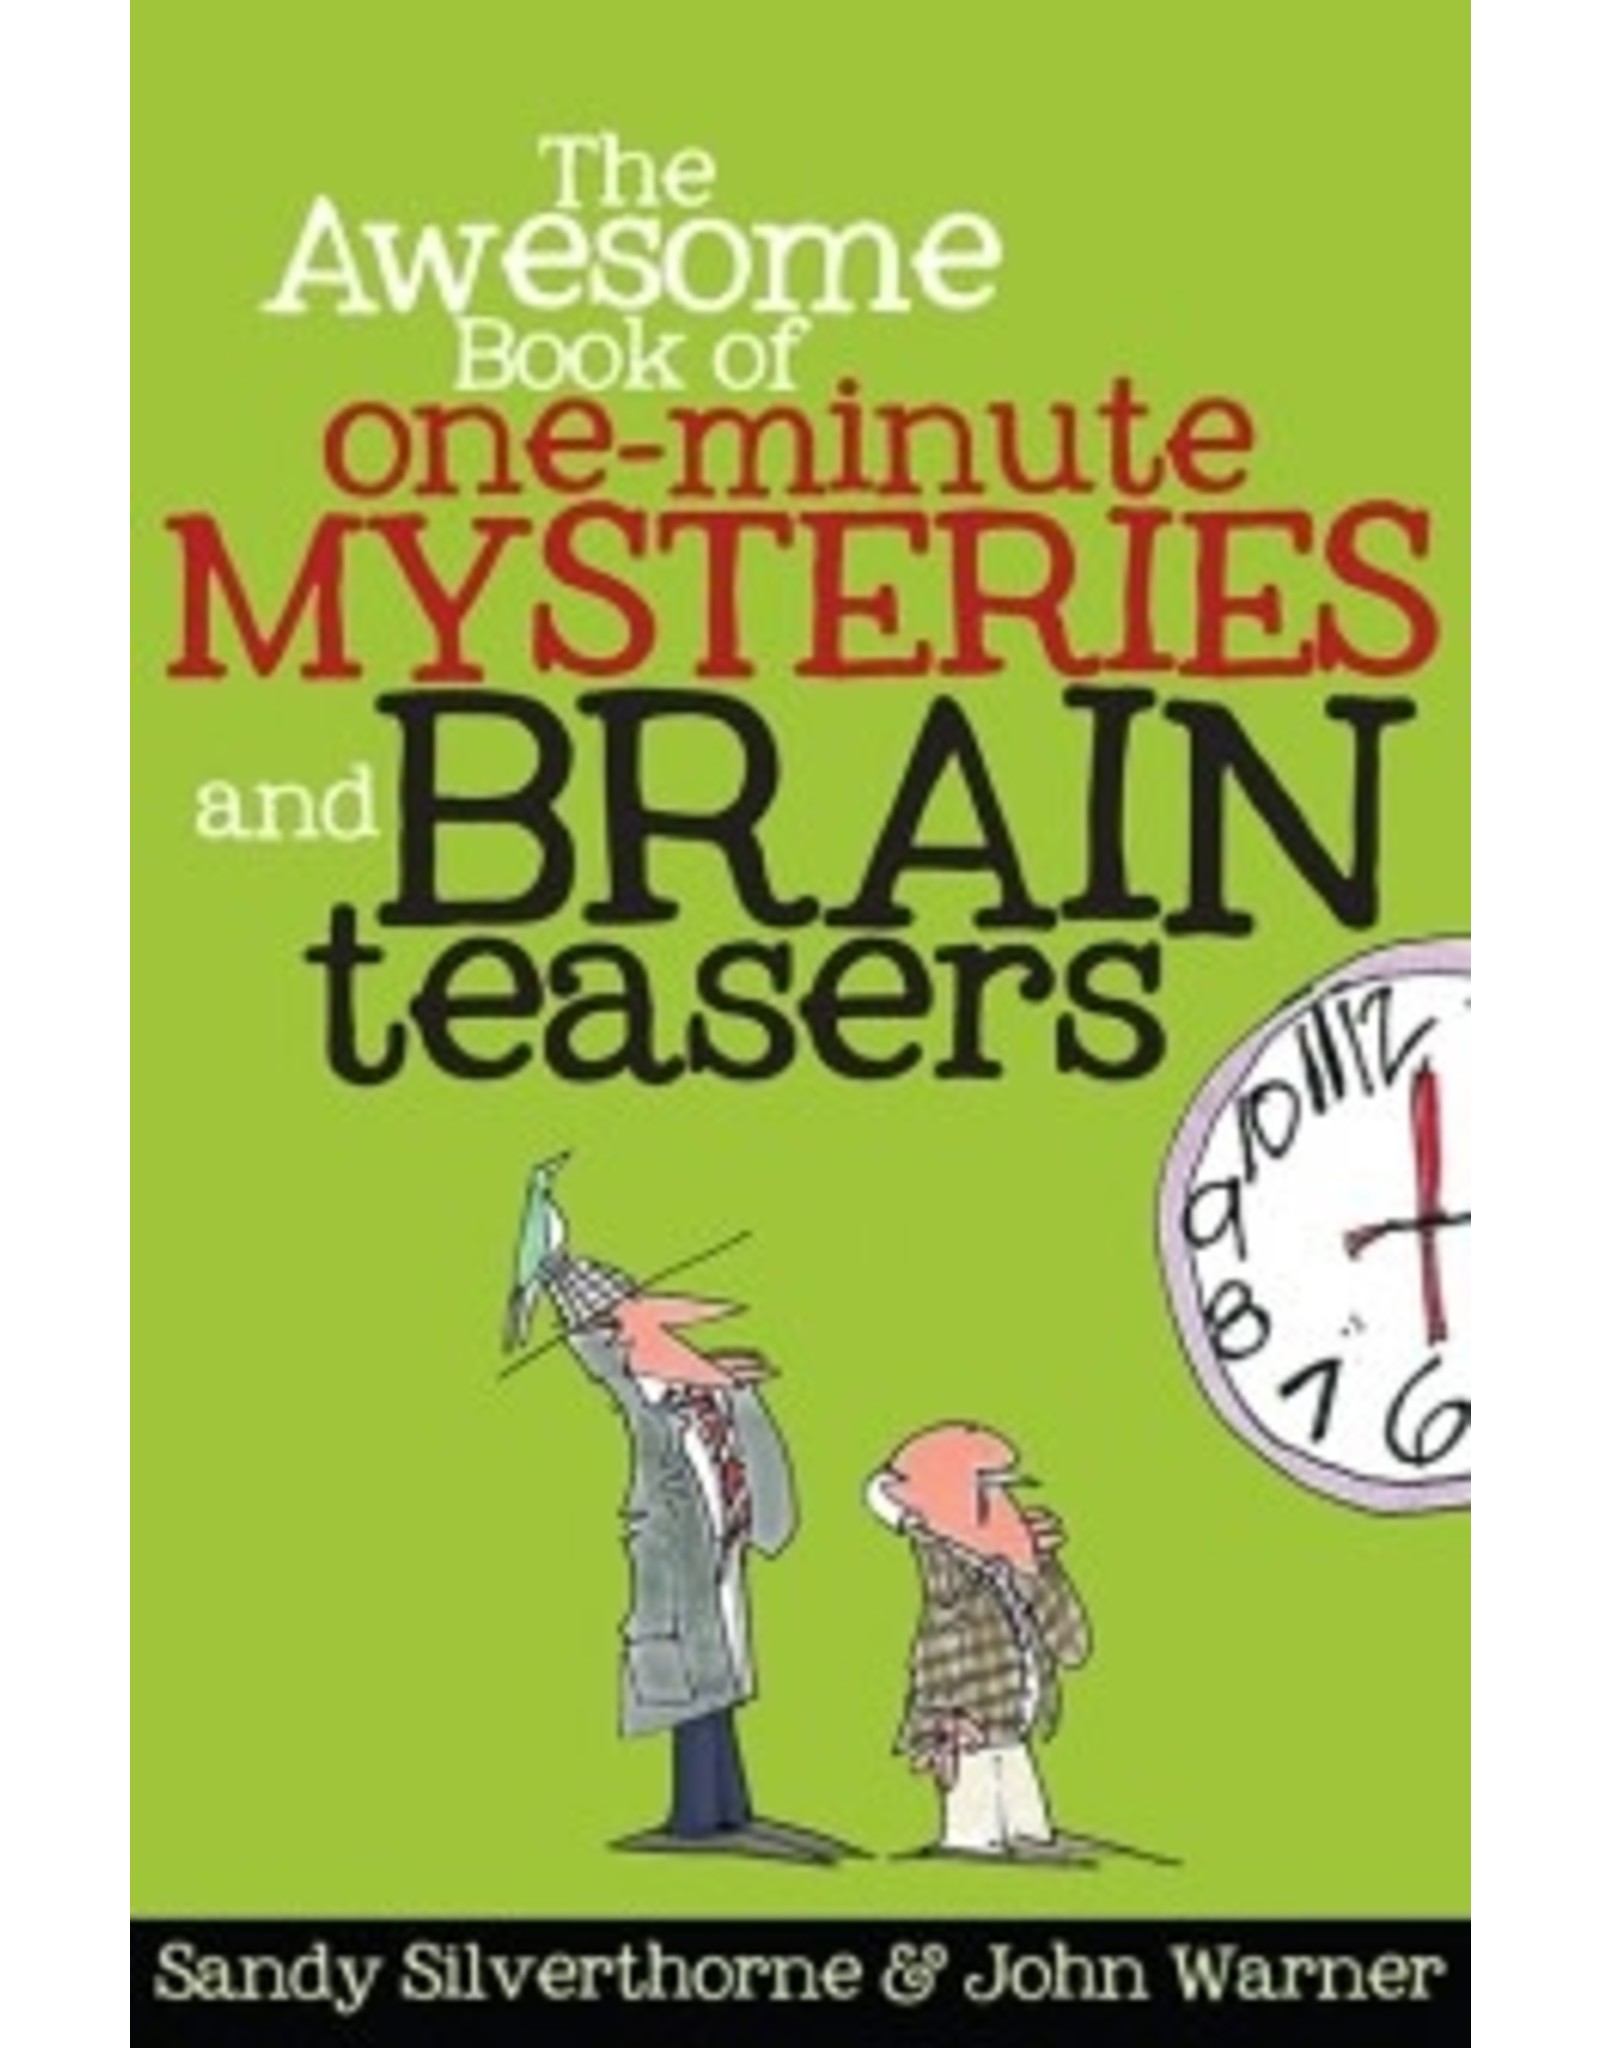 Awesome Book of One Minute Mysteries and Brain Teasers, The